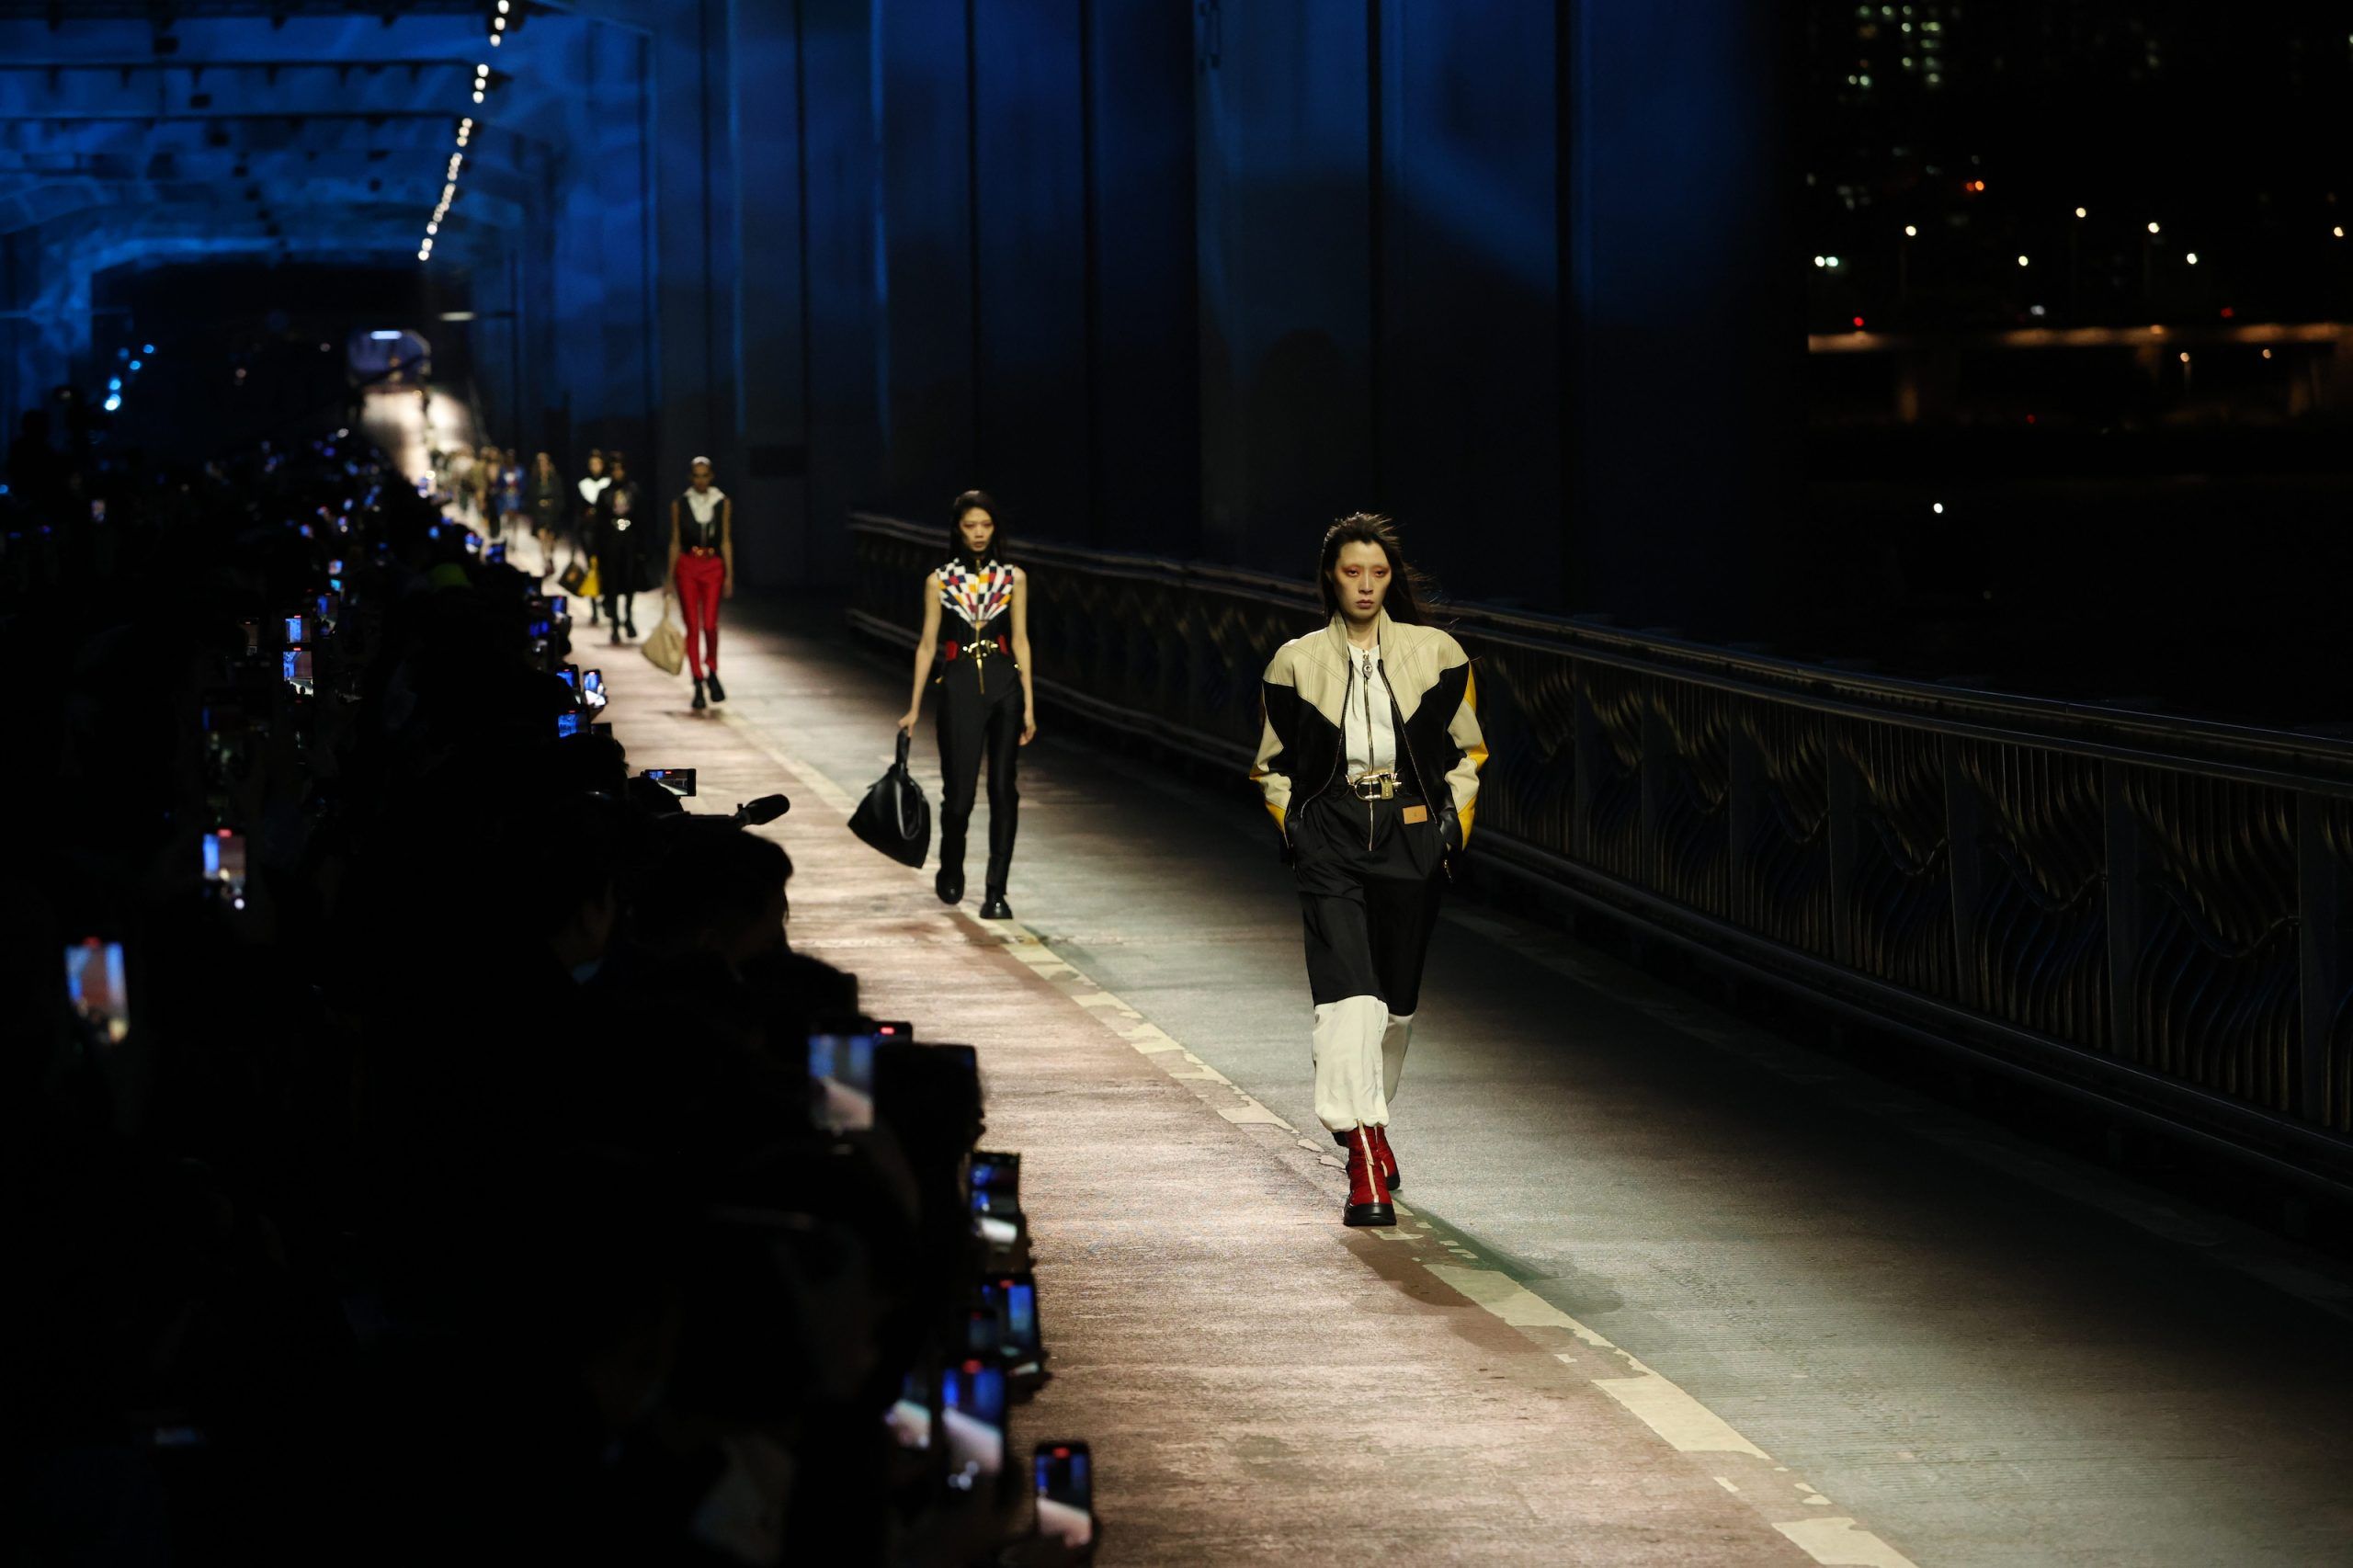 Louis Vuitton Bridges Cultures and Fashion With a Show in Seoul